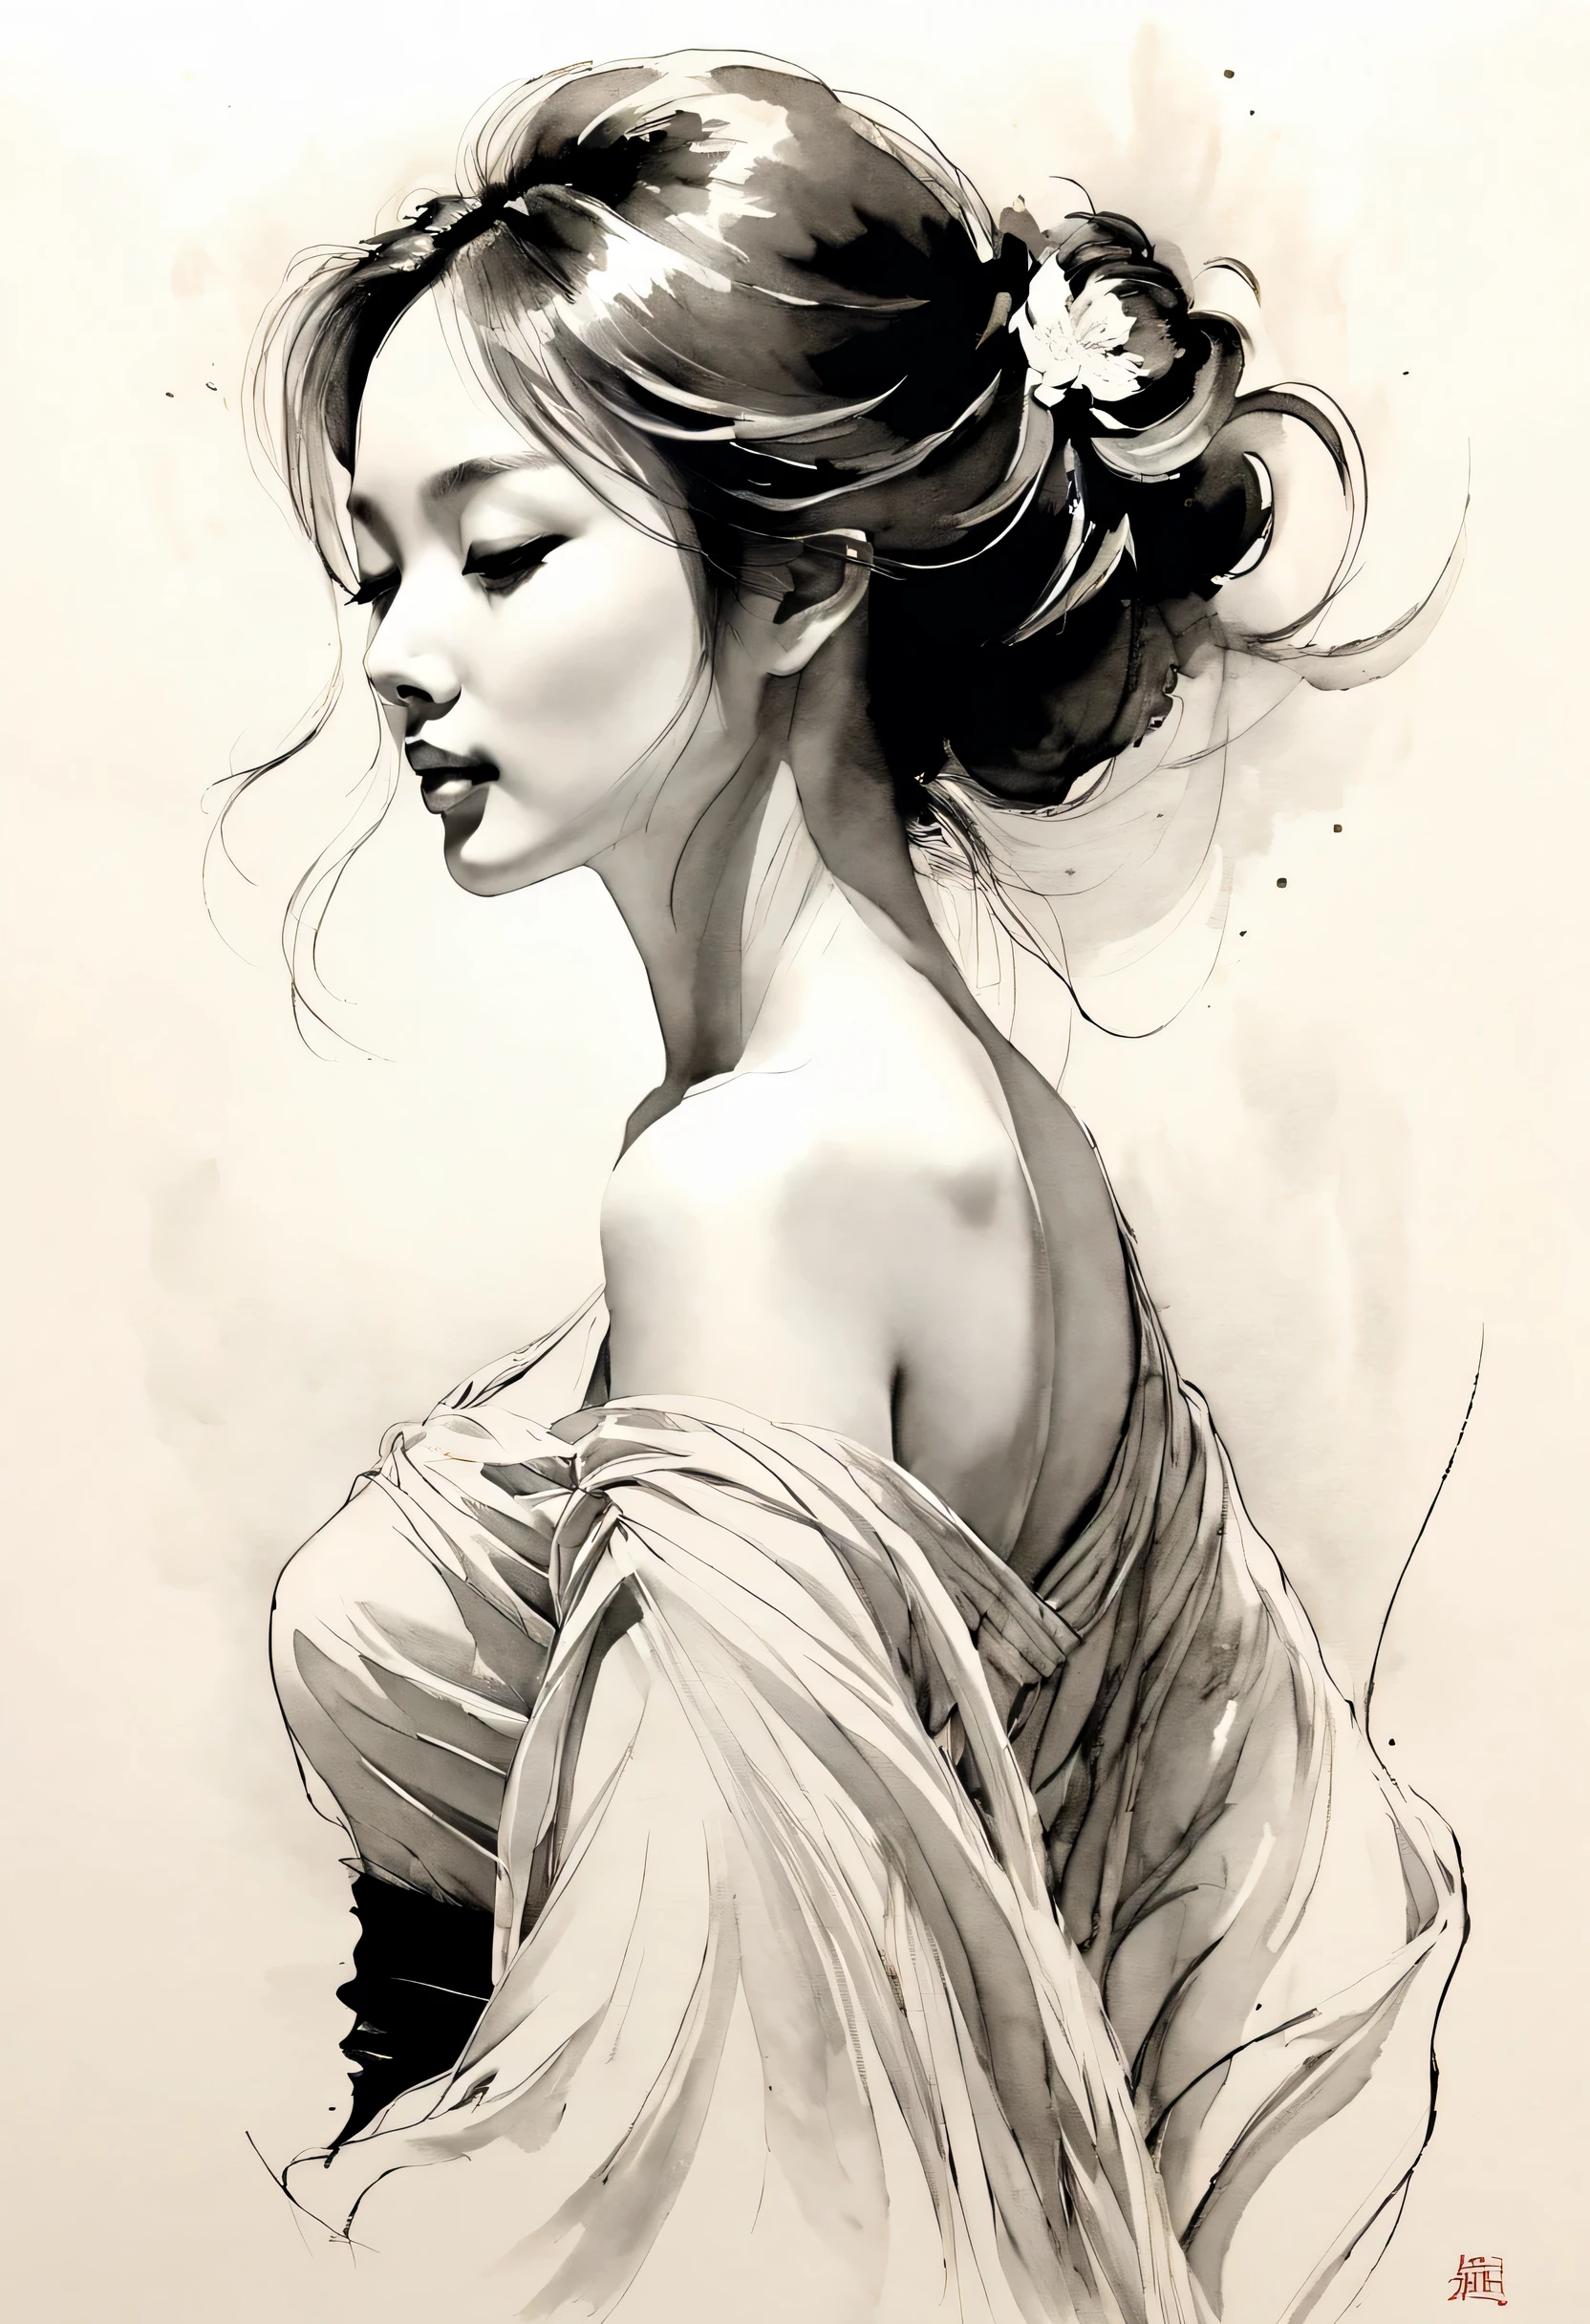 elegant girl，black and white ink painting，pen sketch，Loose brushstrokes，Pen outlines delicate lines，Smooth movements，Subtle ink tones，elegant gesture，calm expression，Exquisite facial features，black and white，Clean